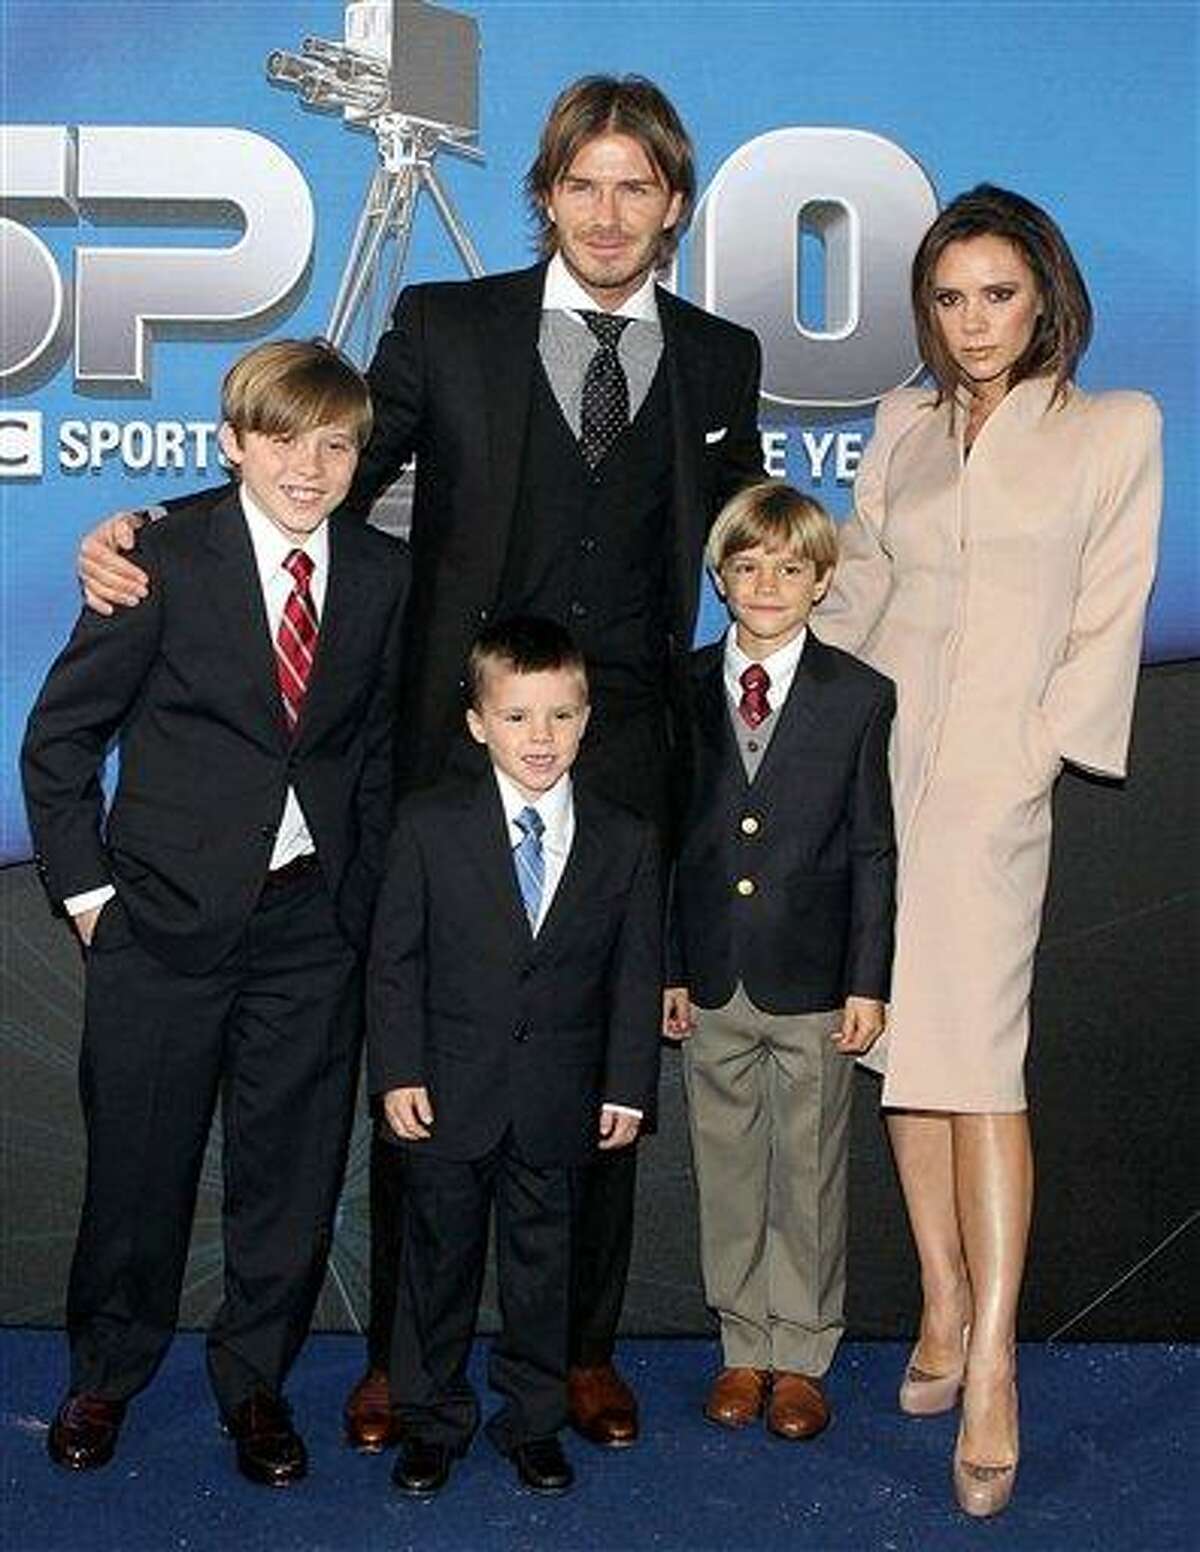 FILE- In this file photo dated Dec. 19 2010 showing the Beckham family, with David and Victoria Beckham, and their sons, from left to right, Brooklyn, Cruz and Romeo. Spokesman for David Beckham, Simon Oliveire says Sunday July 10, 2011, that Victoria Beckham has given birth to a healthy baby girl, at a hospital in Los Angeles, U.S. adding to their family of three boys. (AP Photo / David Davies, PA)